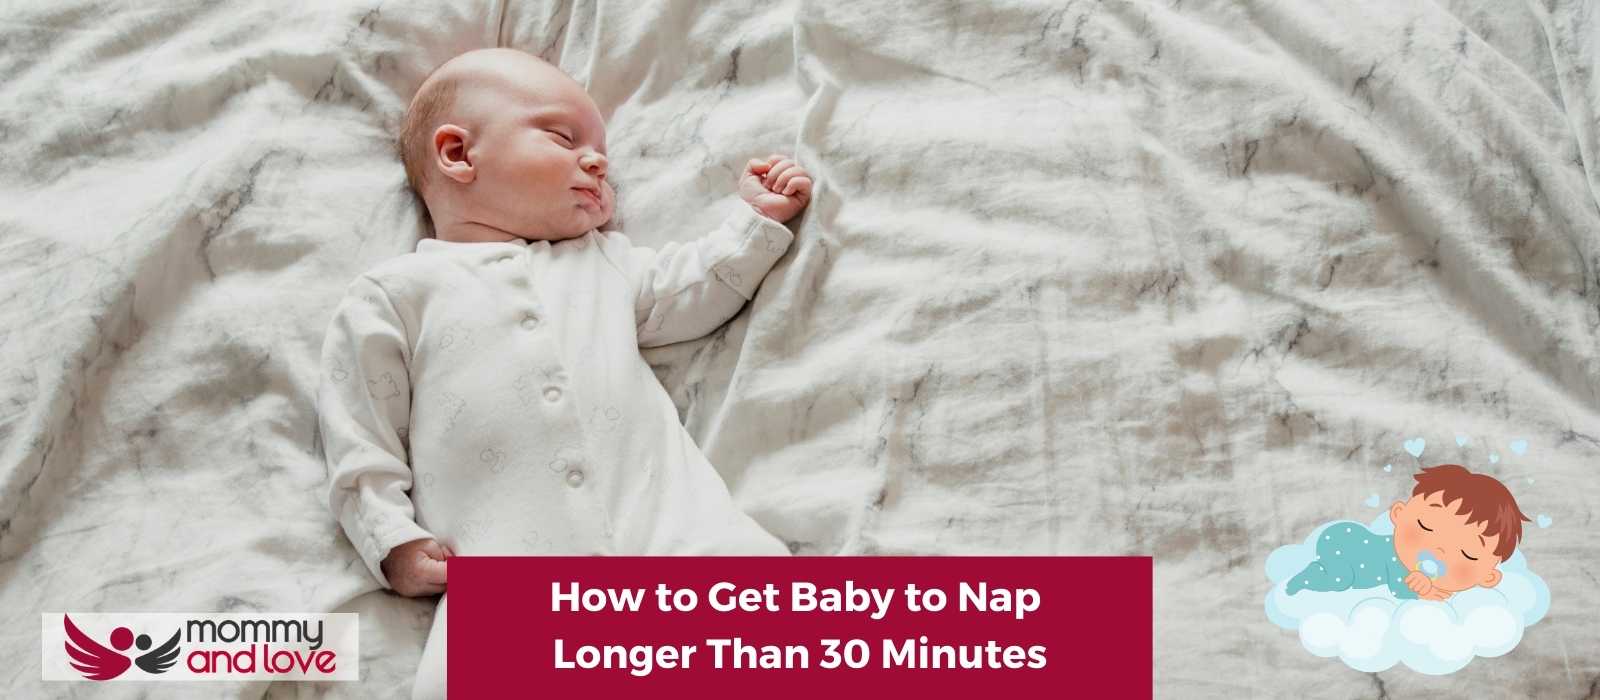 How to Get Baby to Nap Longer Than 30 Minutes